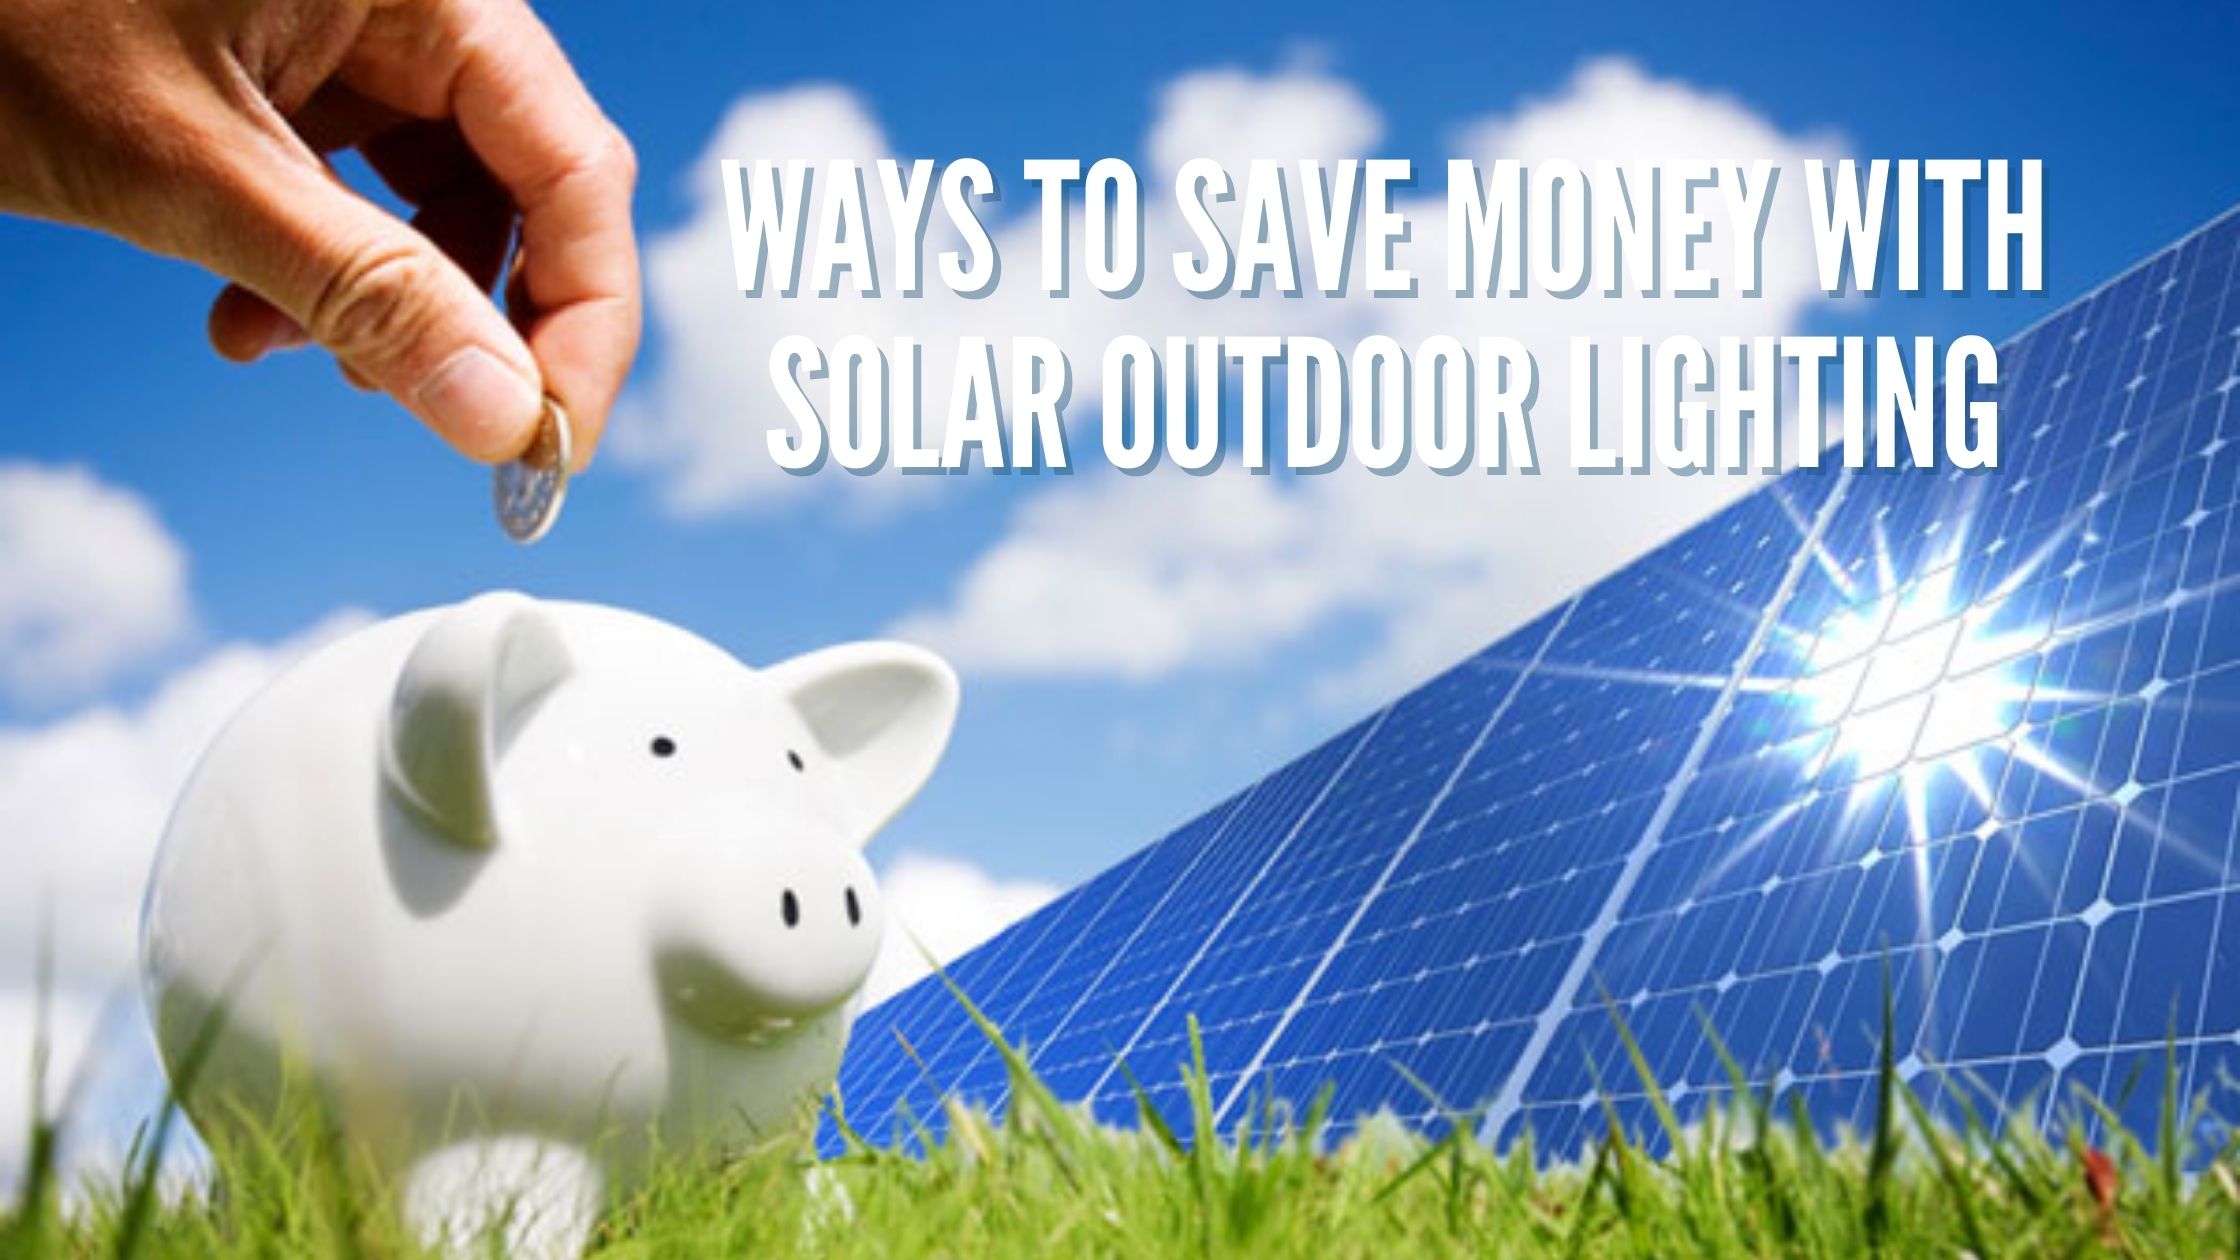 Ways to Save Money with Solar Outdoor Lighting